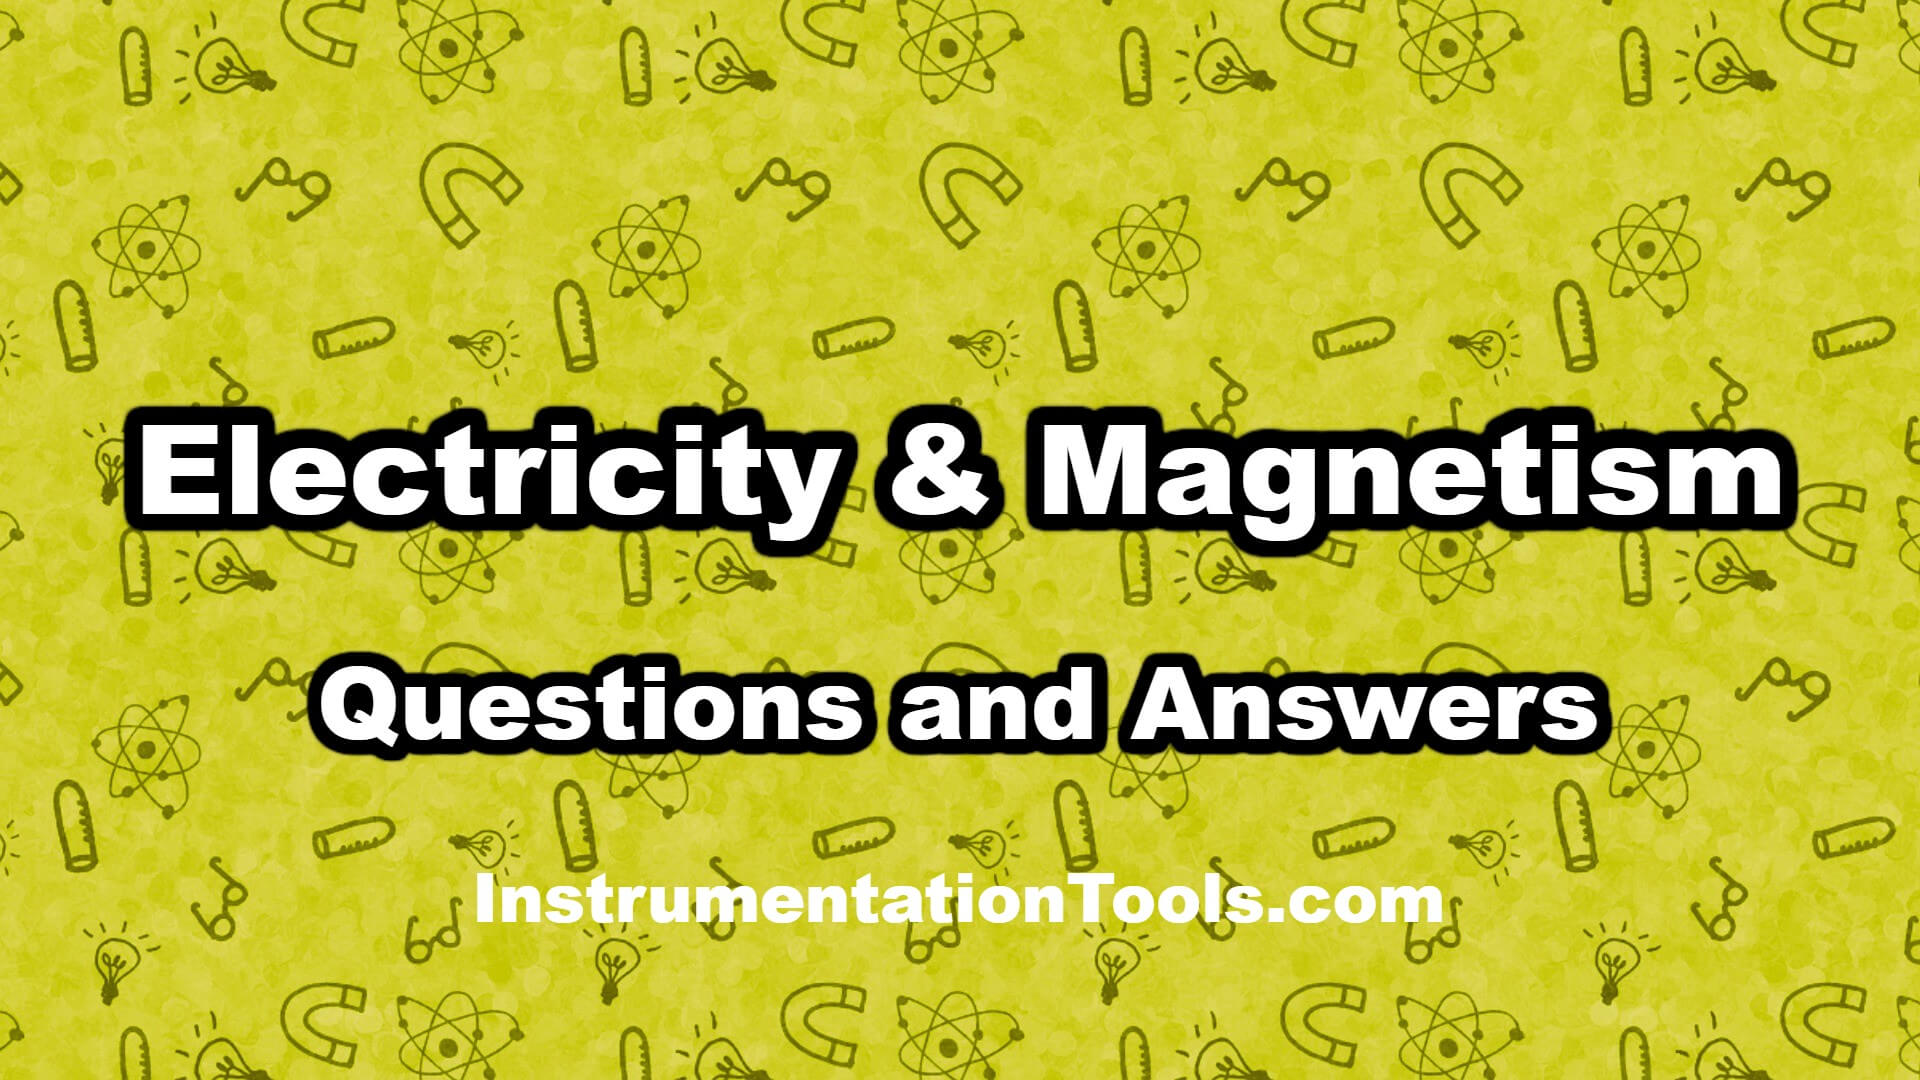 Electricity and Magnetism Questions & Answers